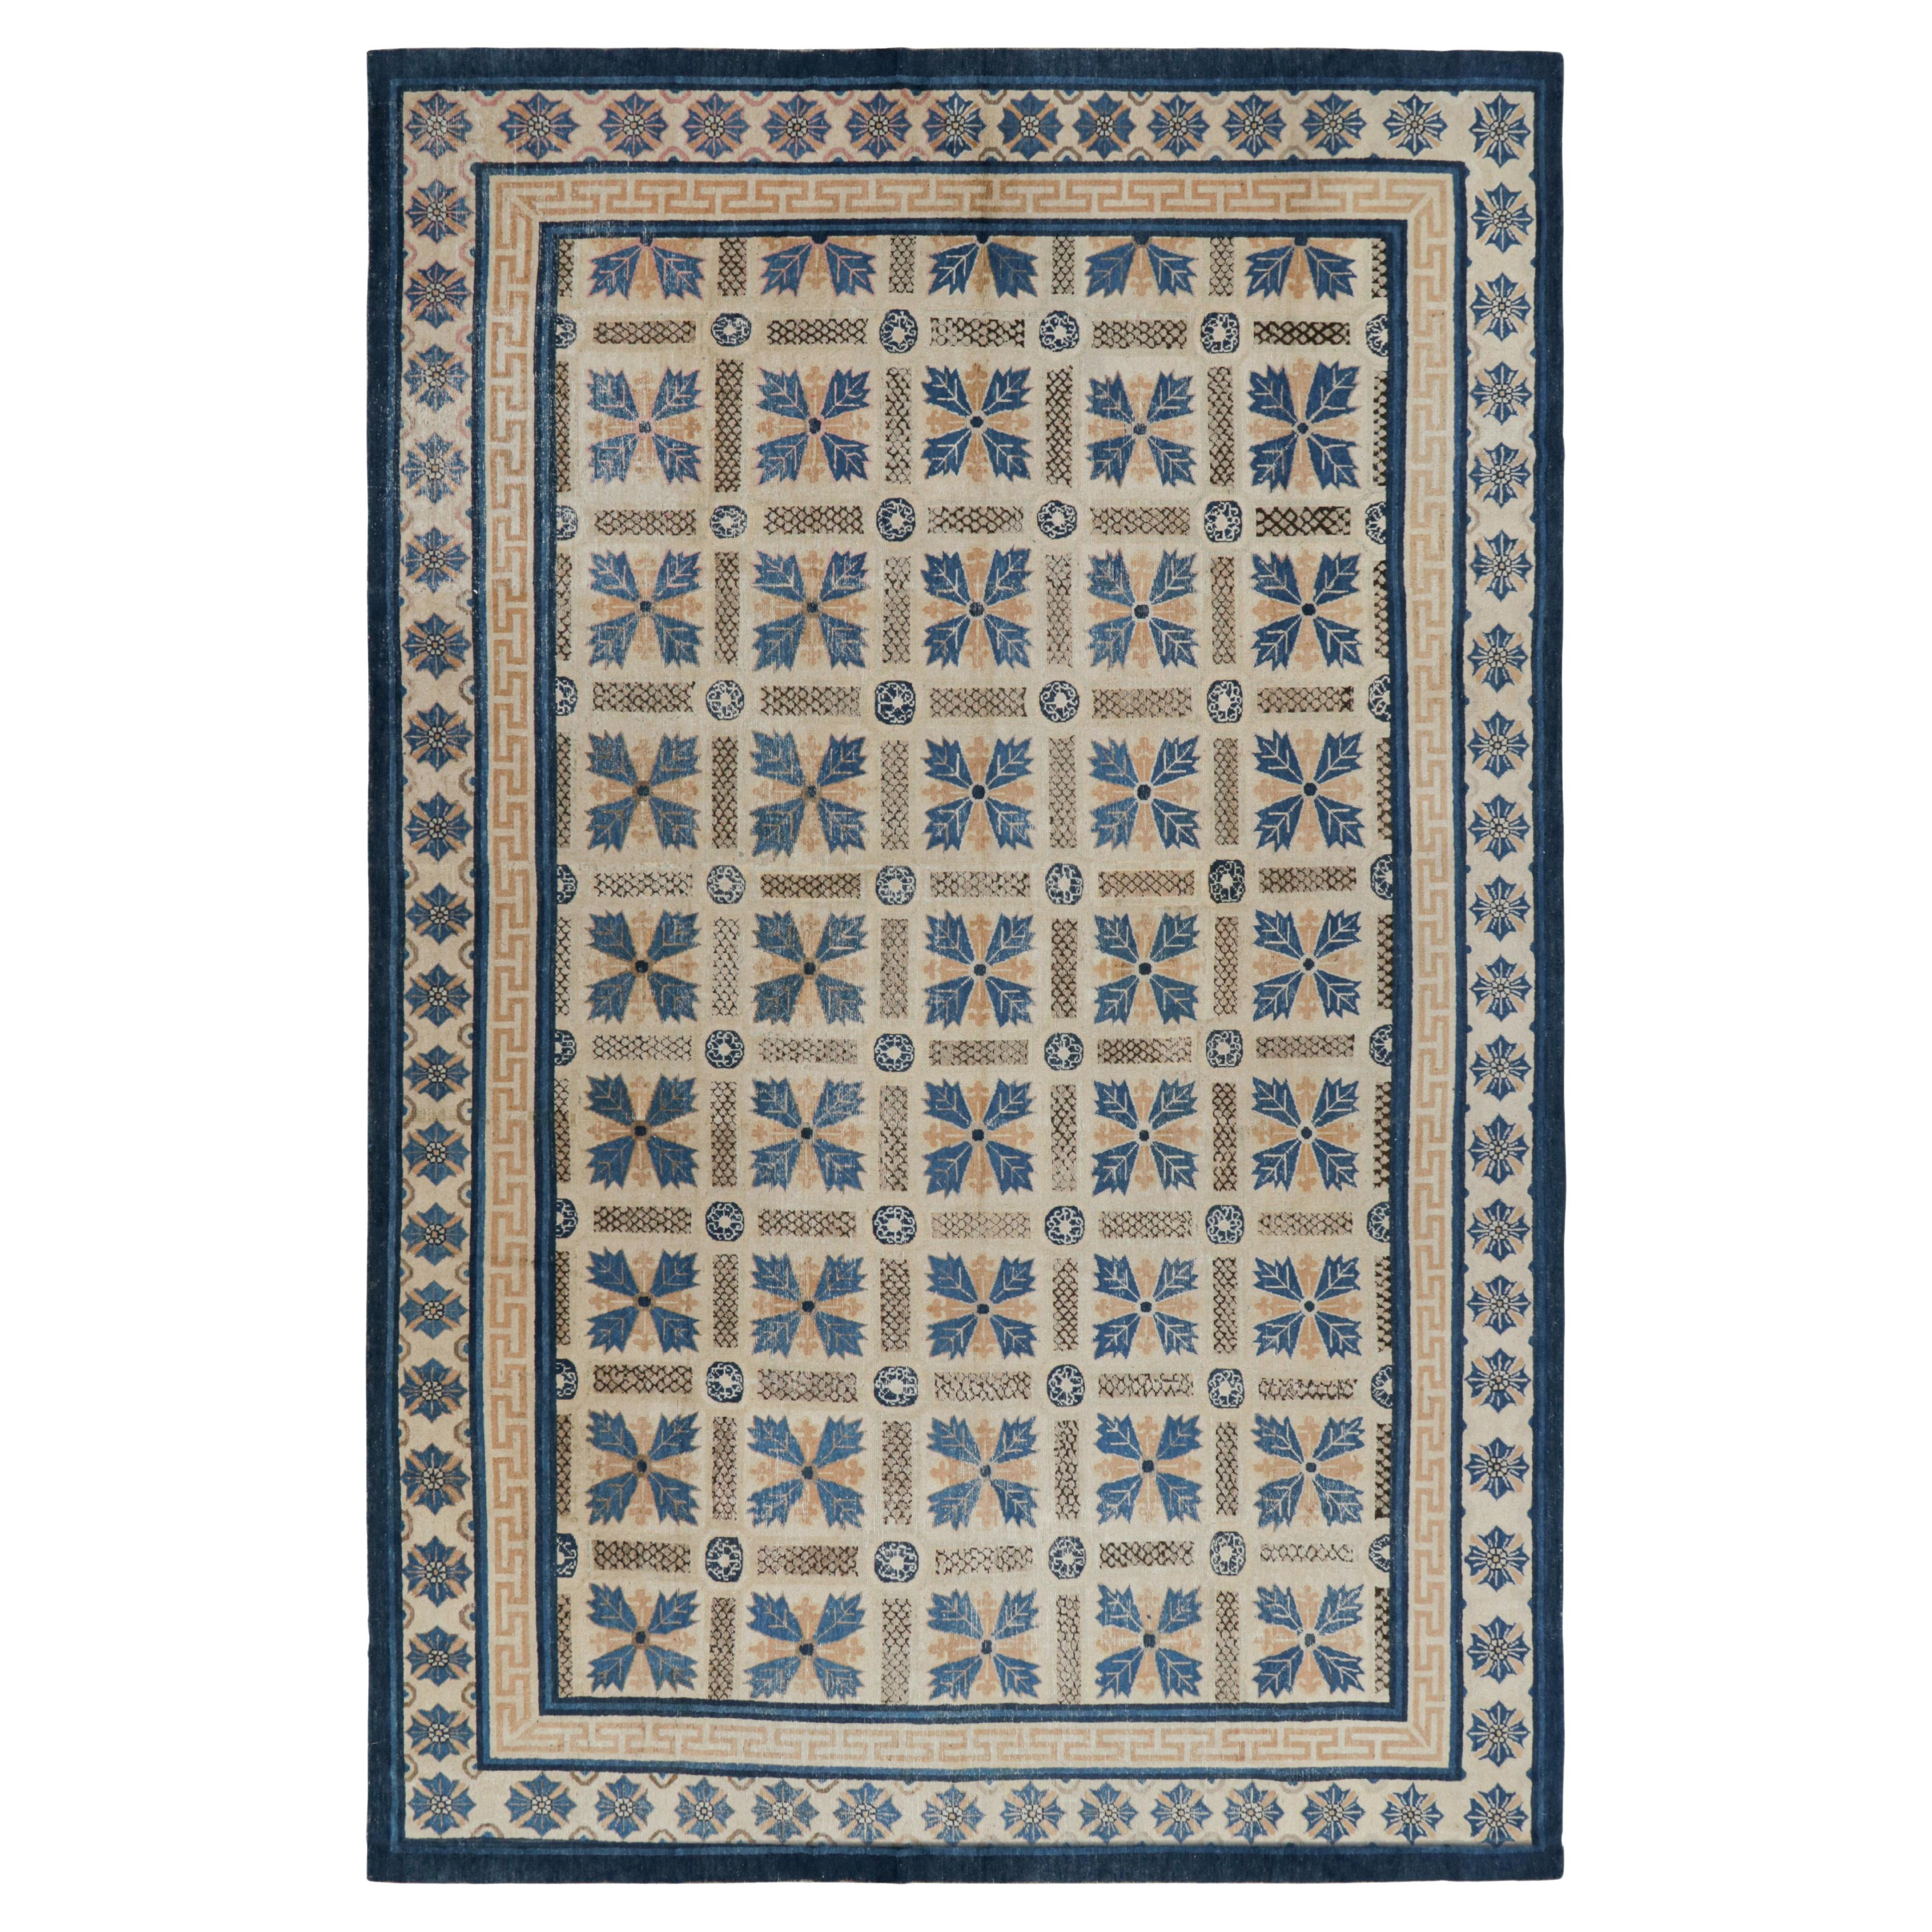 Antique Ningxia Rug in Beige-Brown and Blue Floral Patterns, from Rug & Kilim